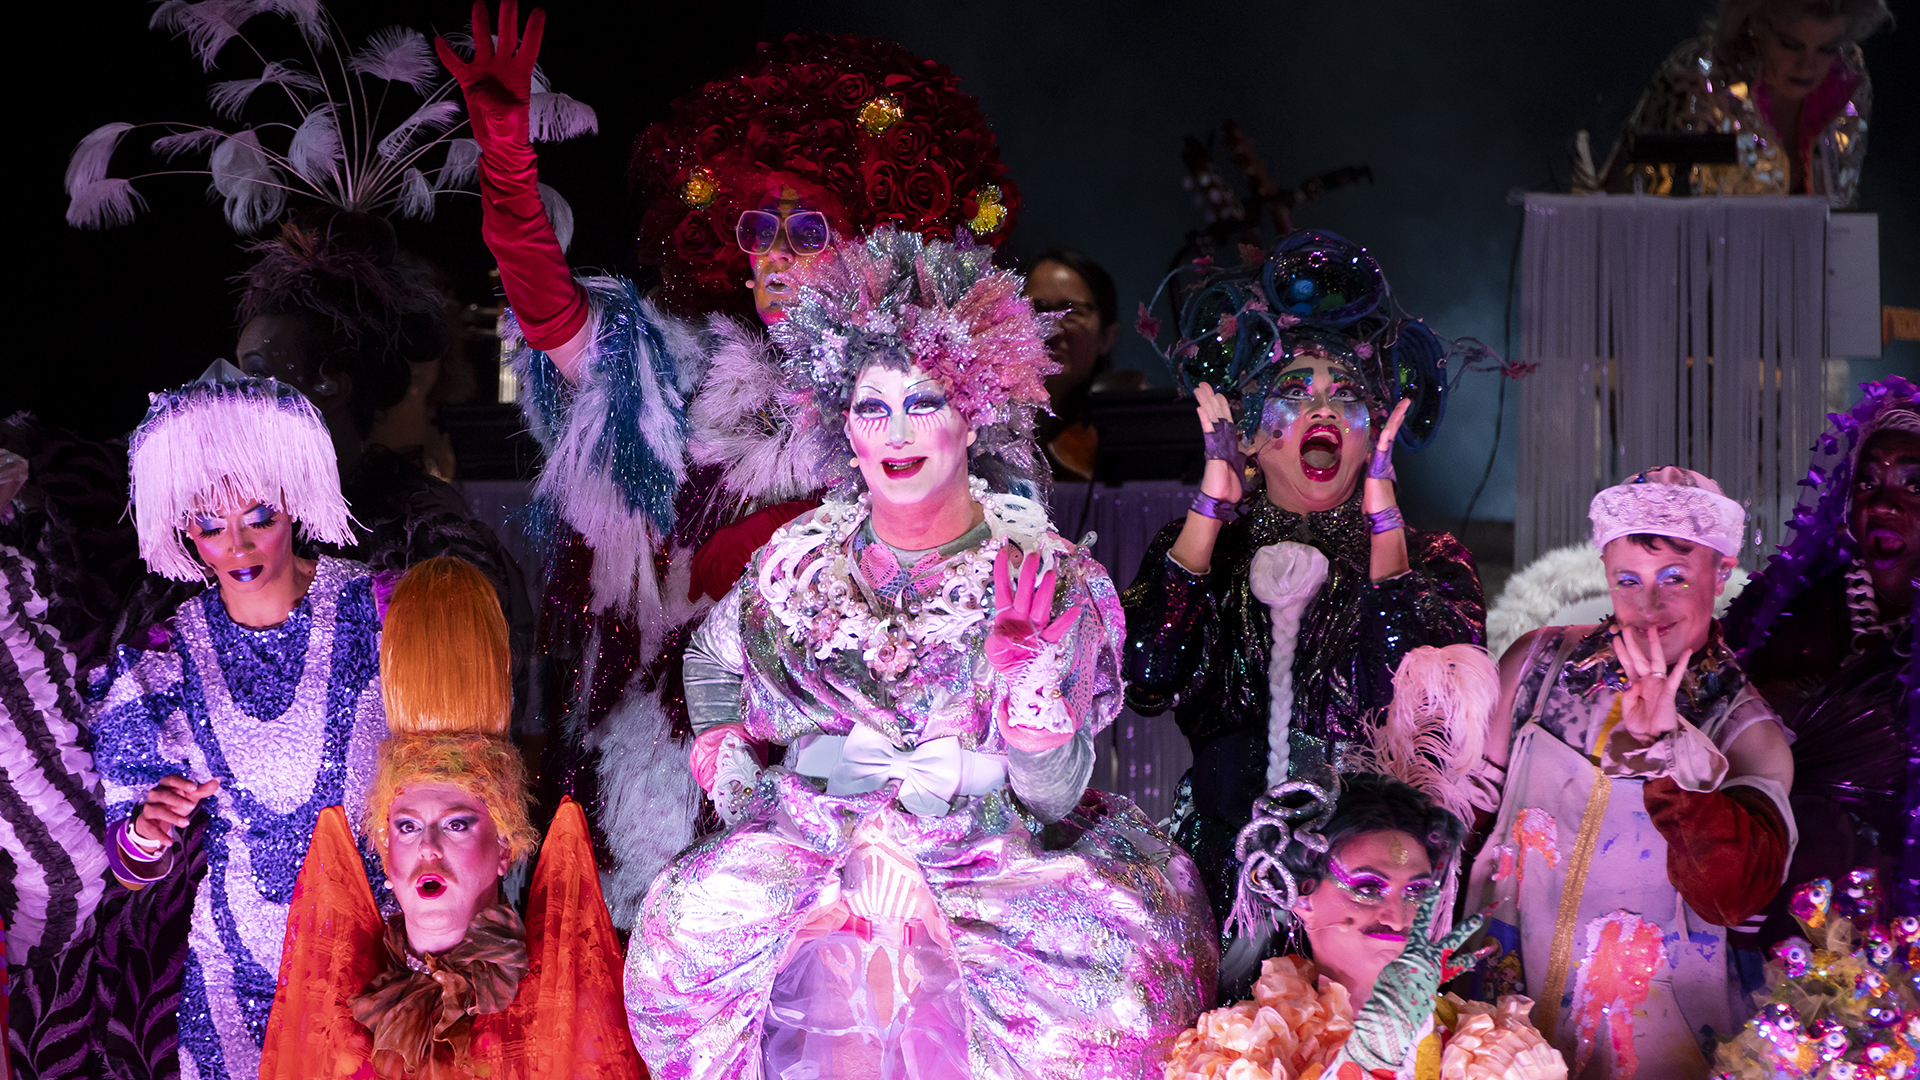 A half dozen people dressed in colorful, vibrant drag costumes perform a song on stage